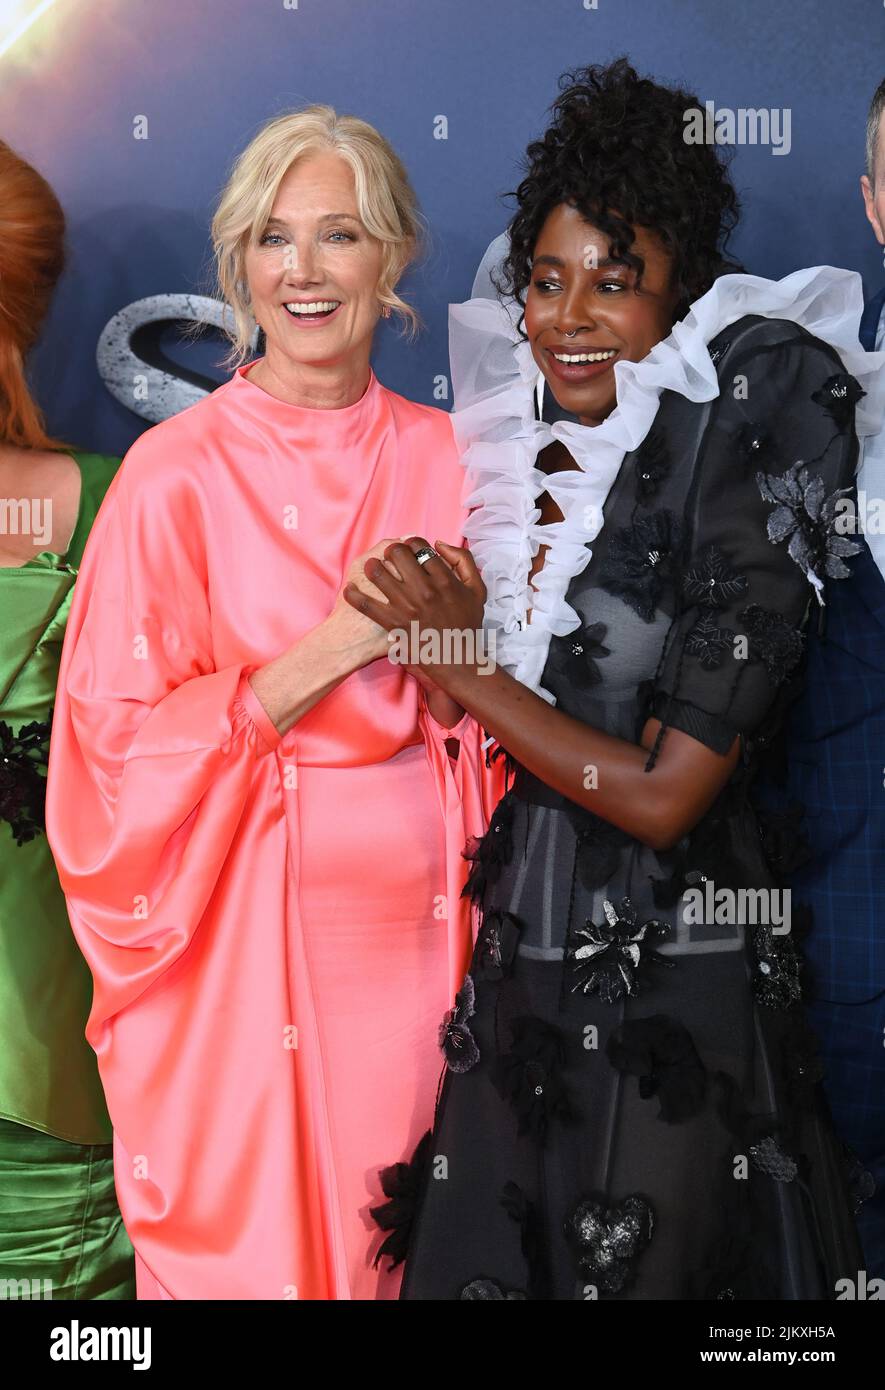 August 3rd, 2022. London, UK. Joely Richardson and Kirby Howell-Baptiste arriving at The Sandman World Premiere, BFI Southbank, London. Credit: Doug Peters/EMPICS/Alamy Live News Stock Photo